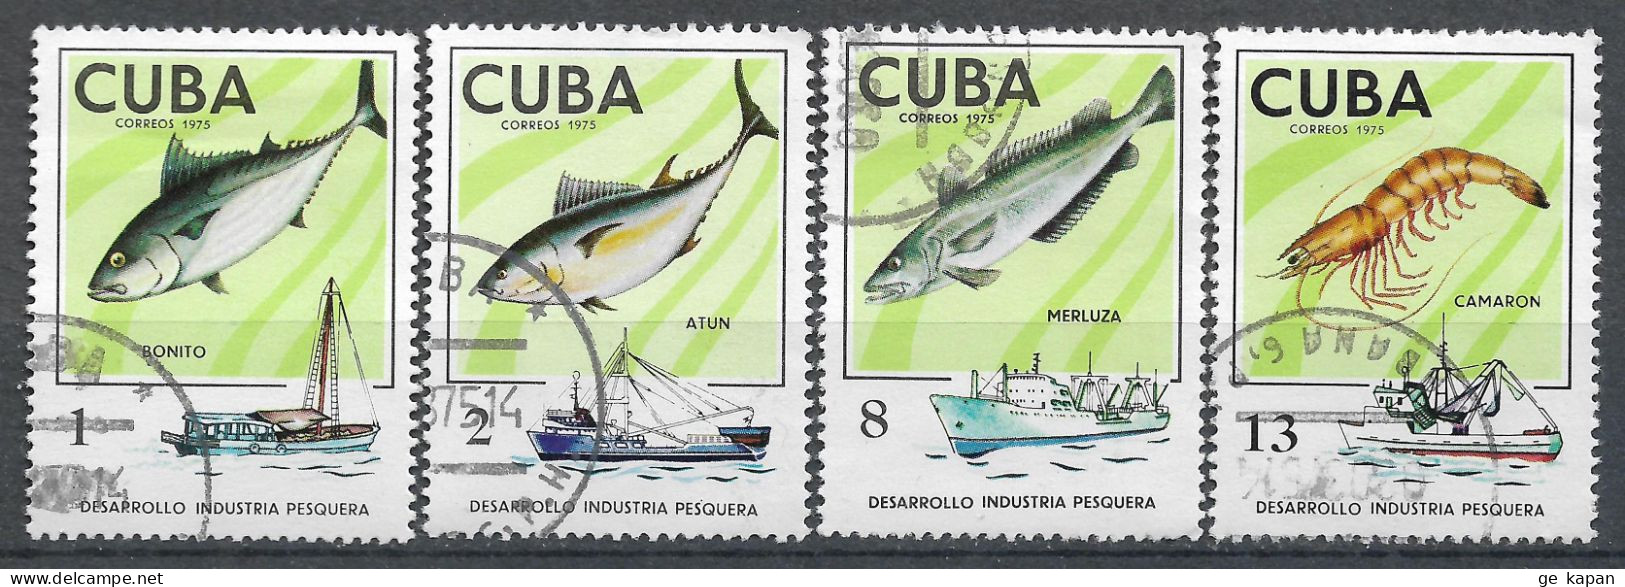 1975 CUBA Set Of 4 Used Stamps (Michel # 2030,2031,2033,2035) CV €1.80 - Gebraucht